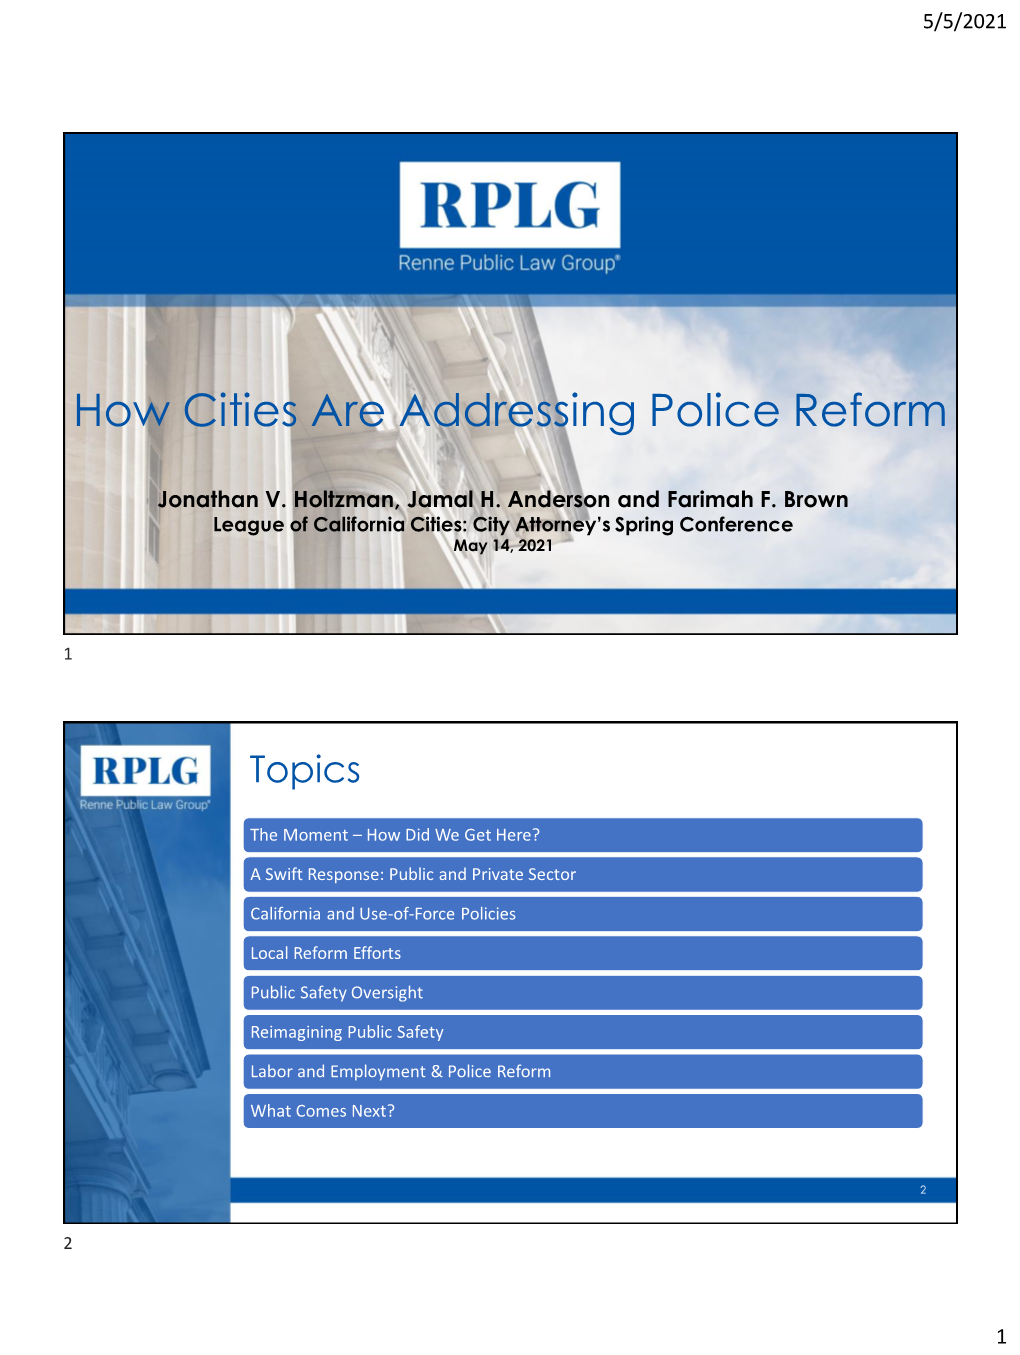 How Cities Are Addressing Police Reform